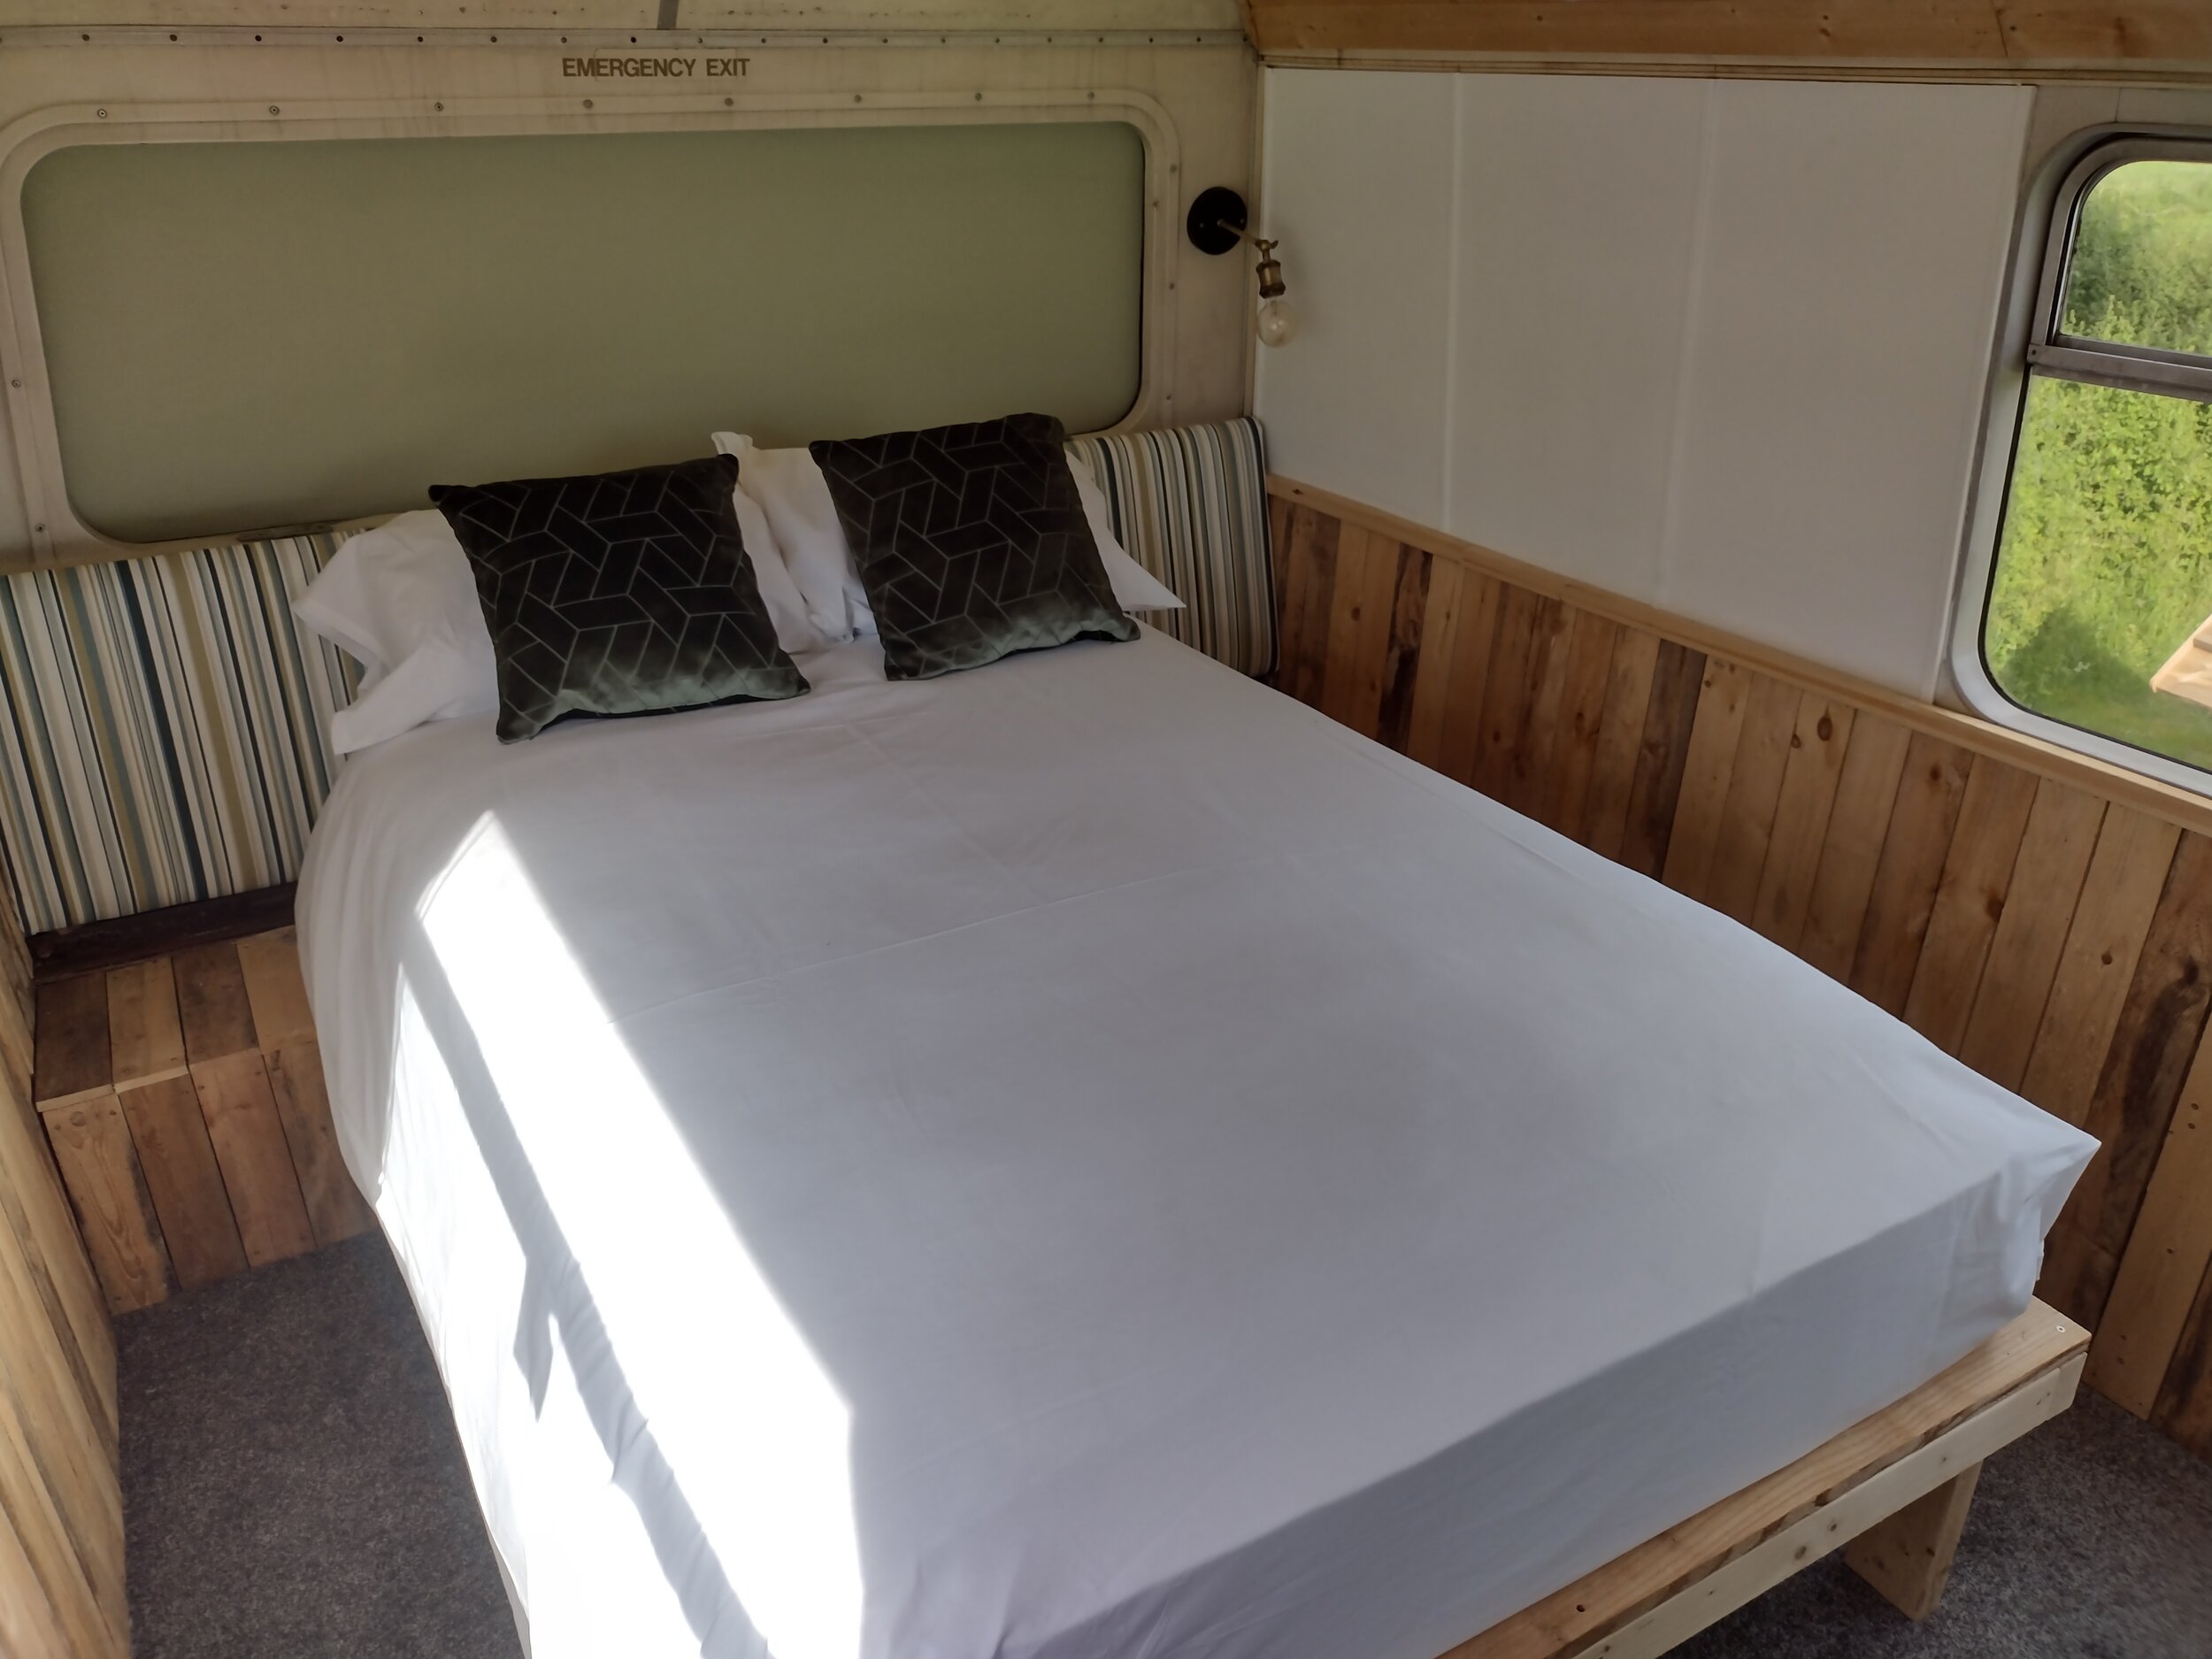 Stanford Farm's double decker bus conversion upstairs bedroom 1